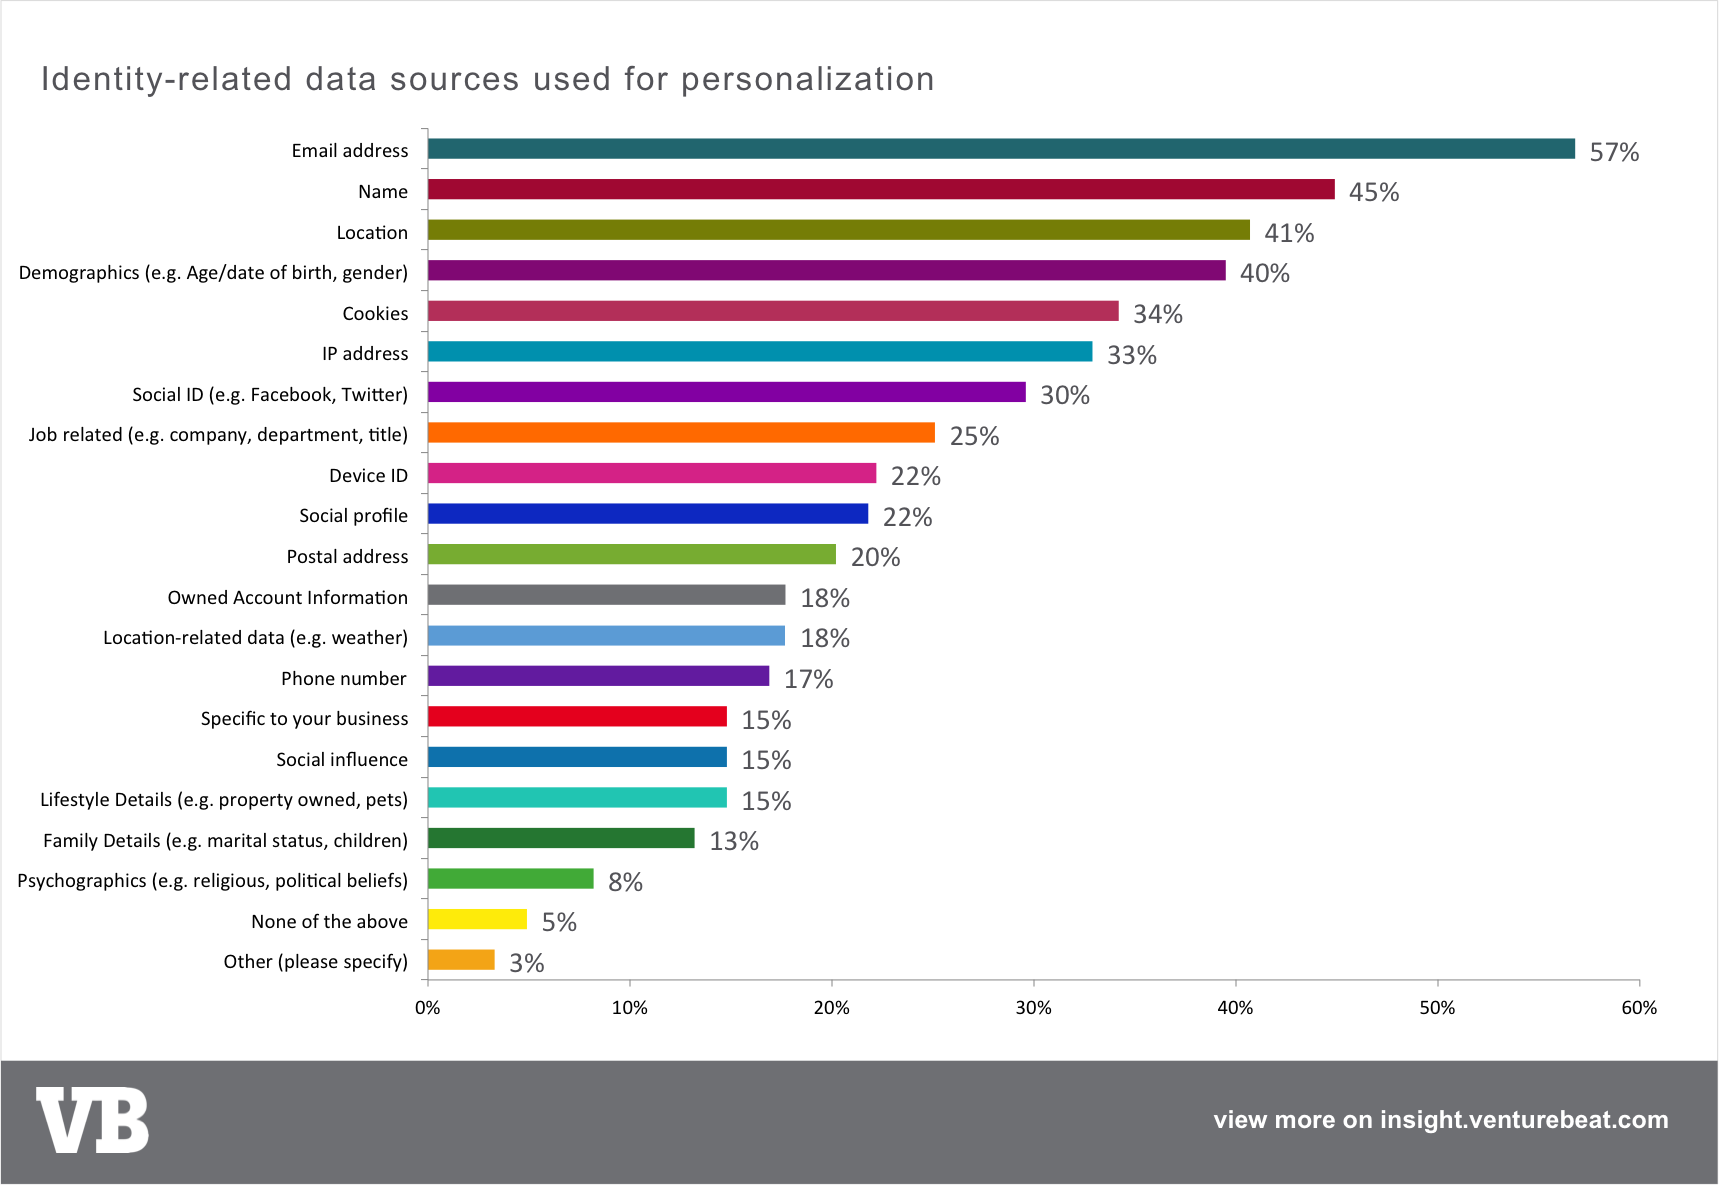 Popular data sources being used for personalization today